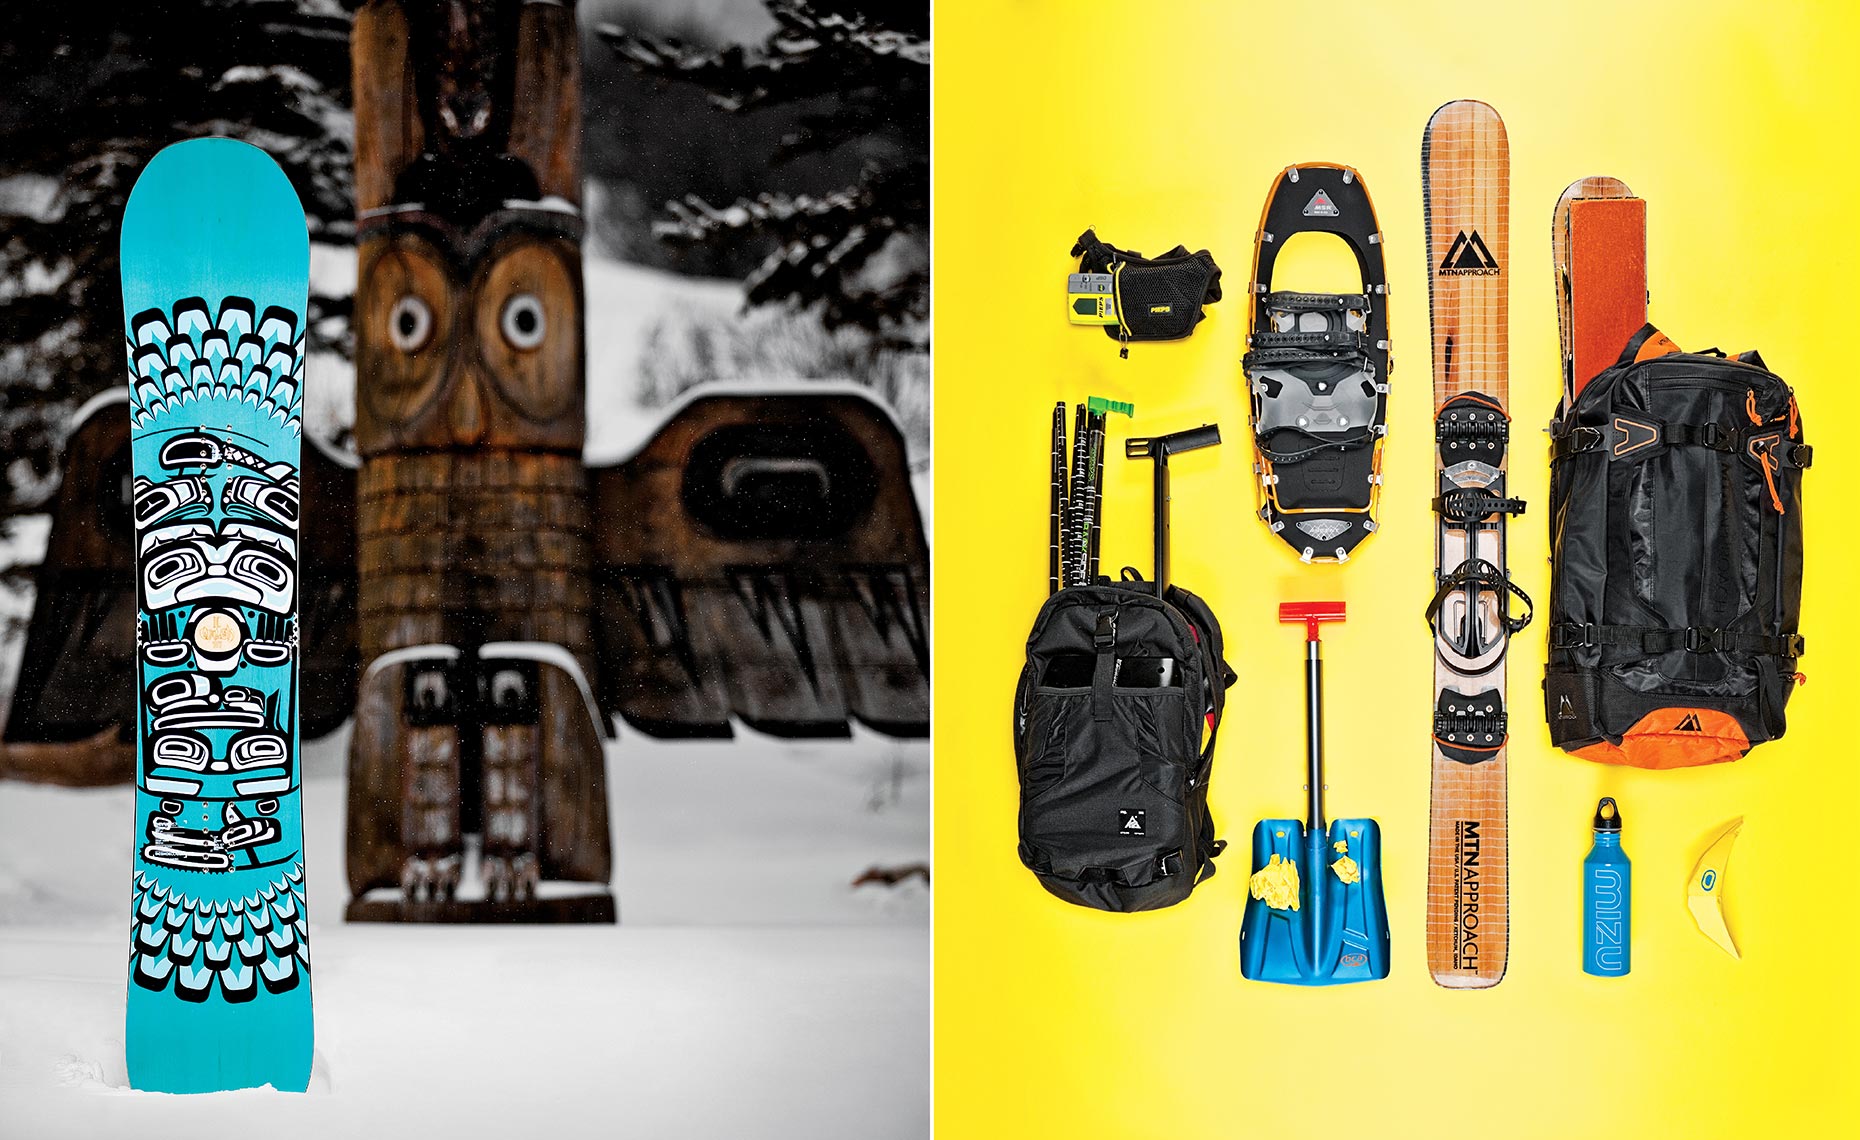 11_Snowboarding_Snowboards_Backcountry_Product_Chris_Wellhausen_Photography-DUP.JPG